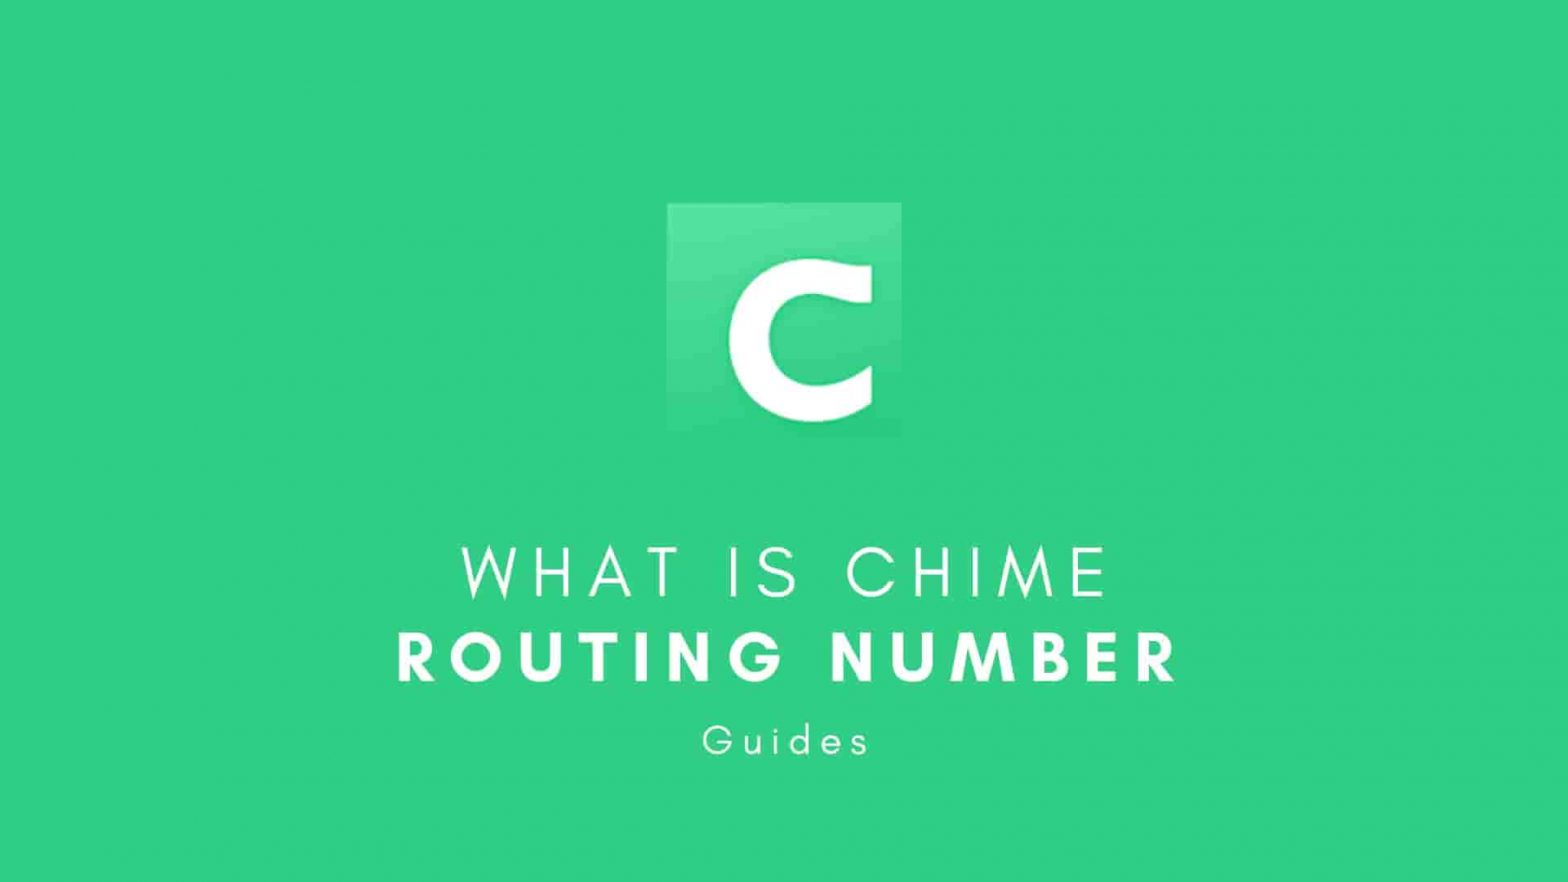 What is Chime routing number